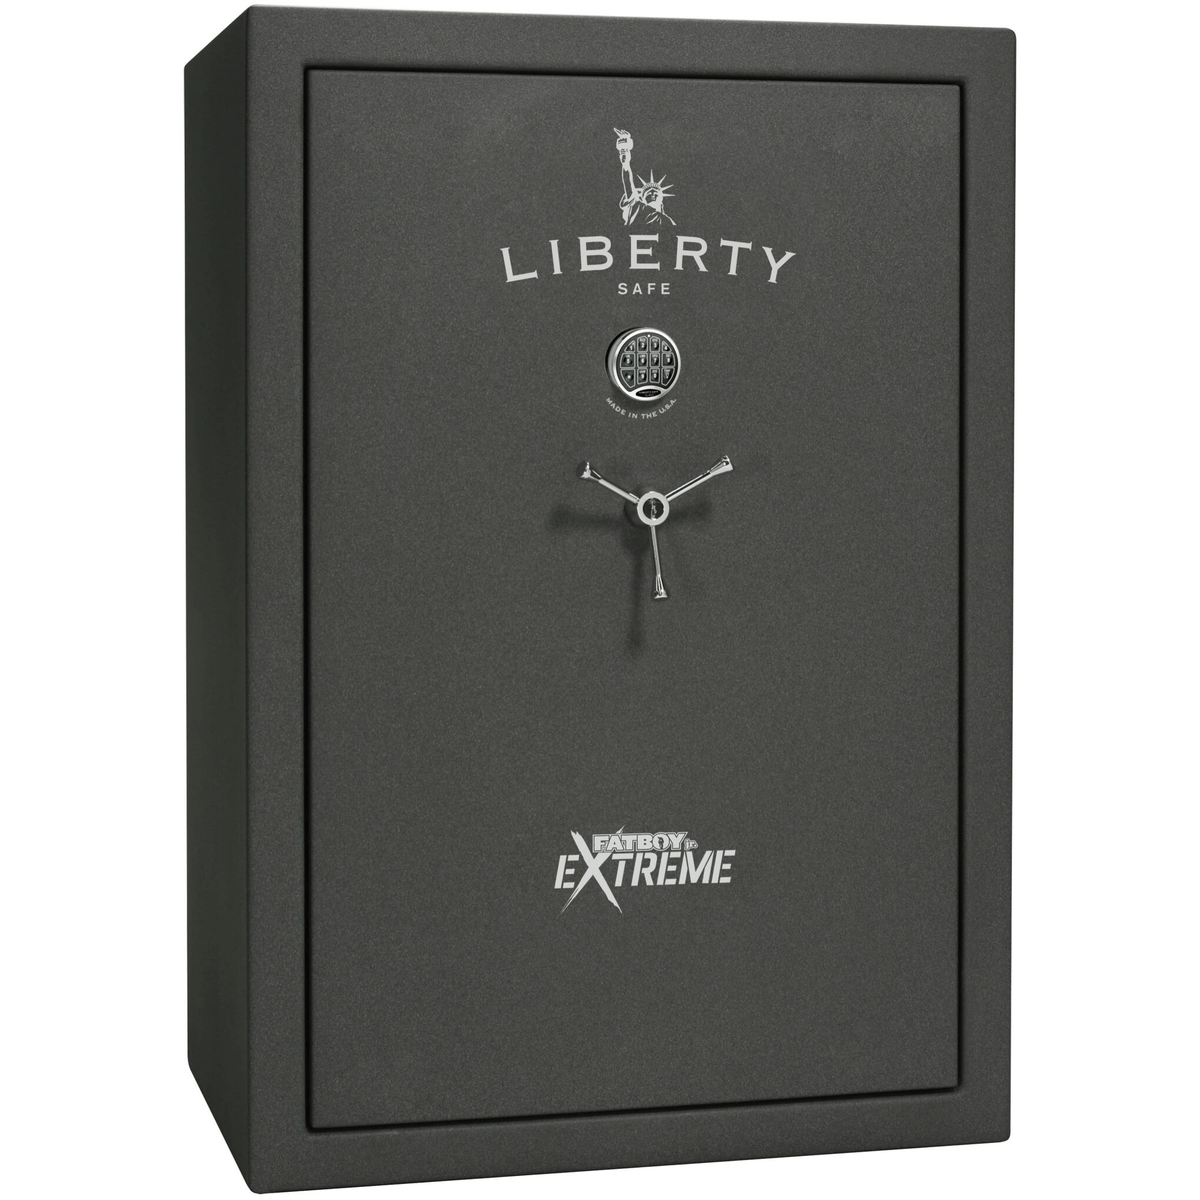 Fatboy Junior Extreme Safe in Textured Granite with Chrome Electronic Lock.